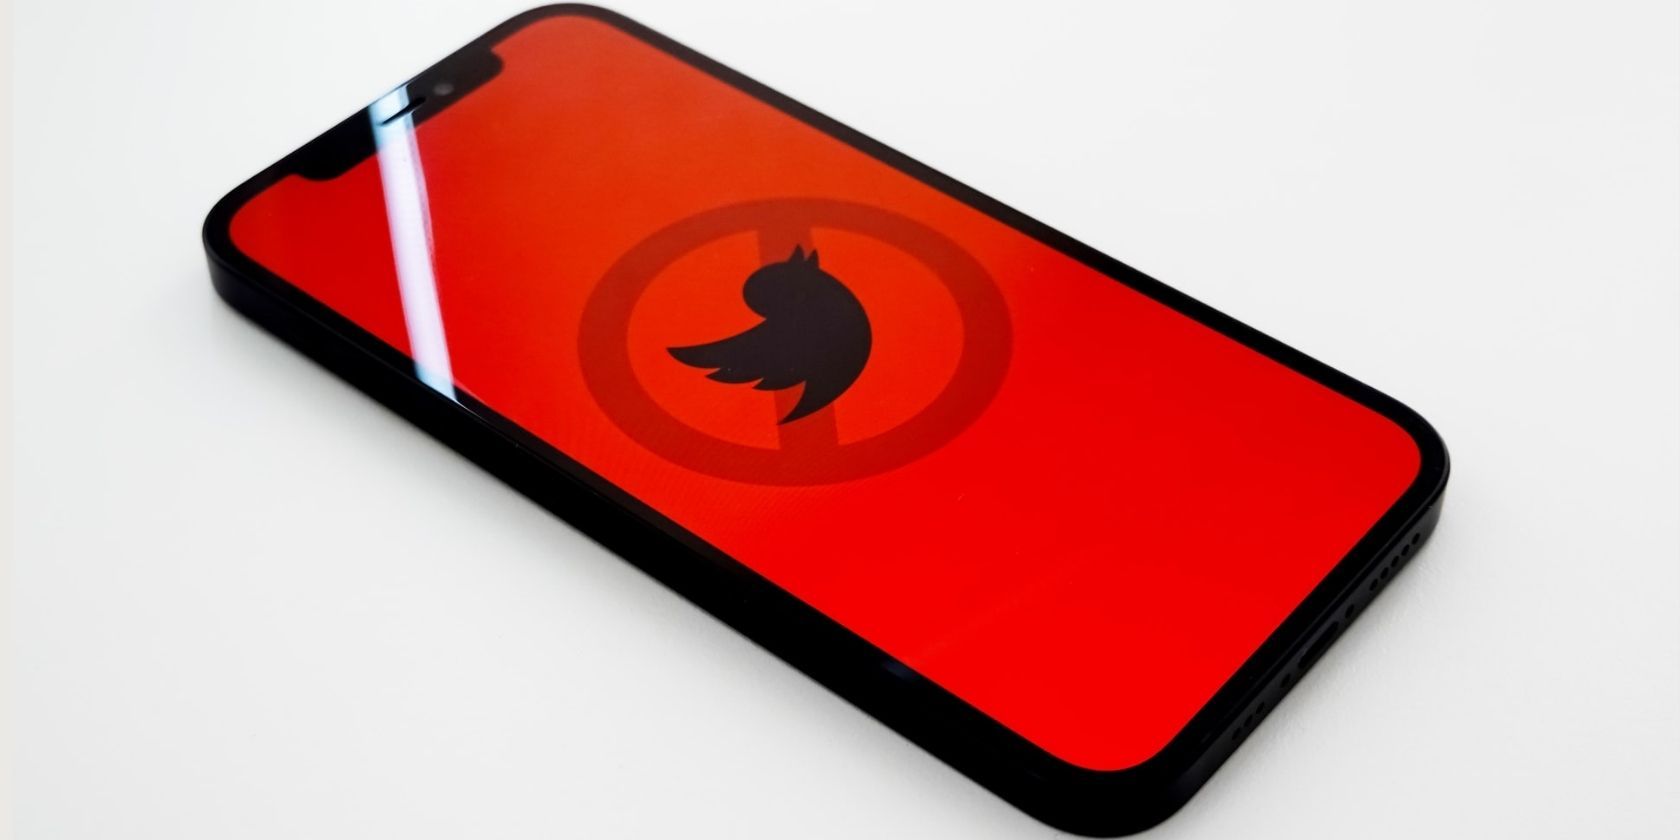 cross out twitter logo on phone red